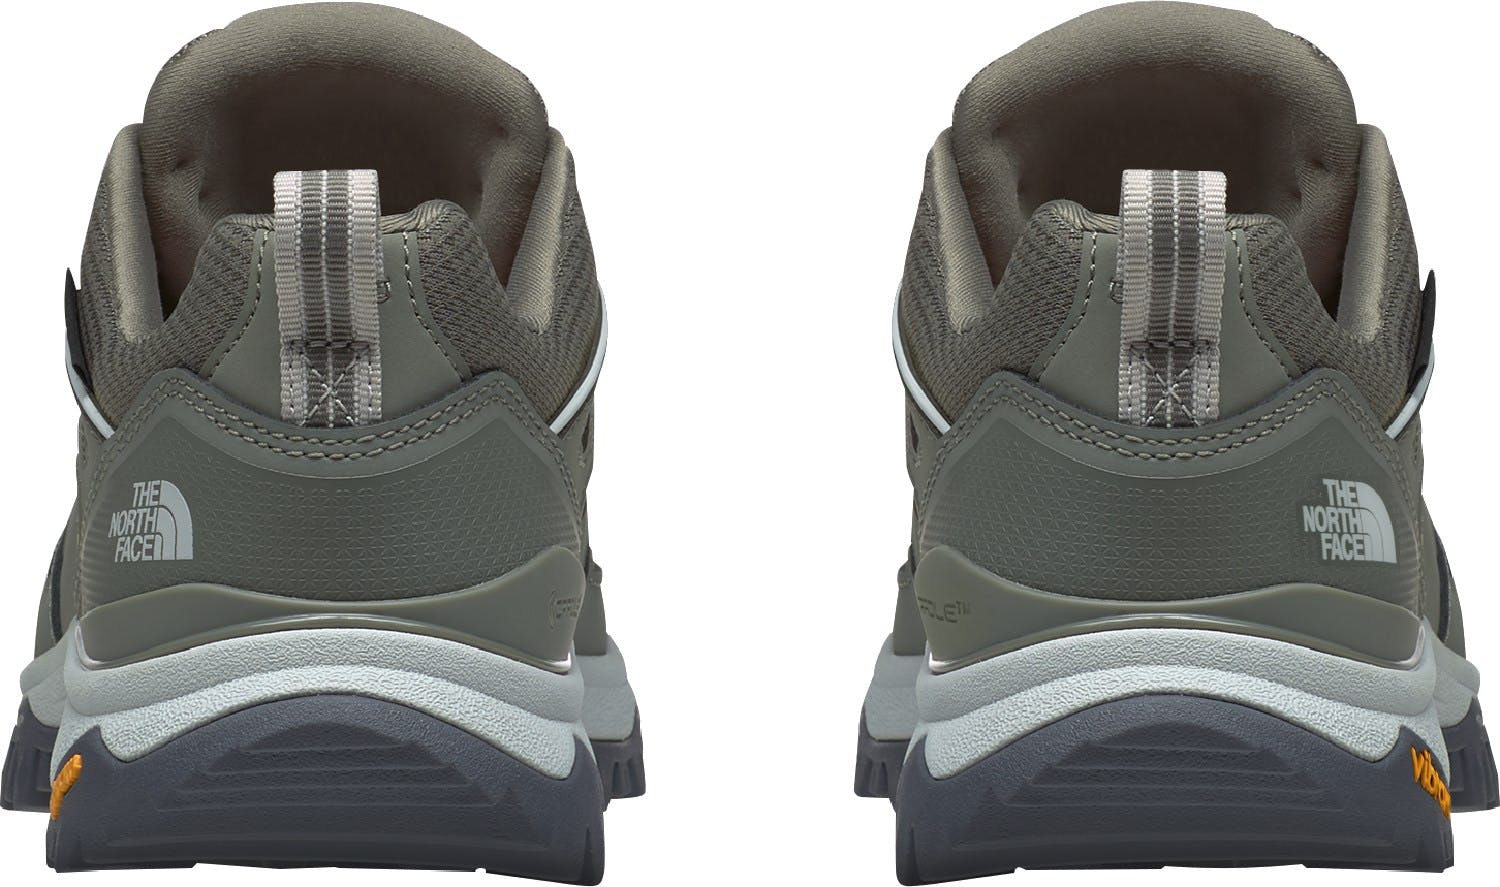 The North Face Women's Hedgehog Futurelight Shoes